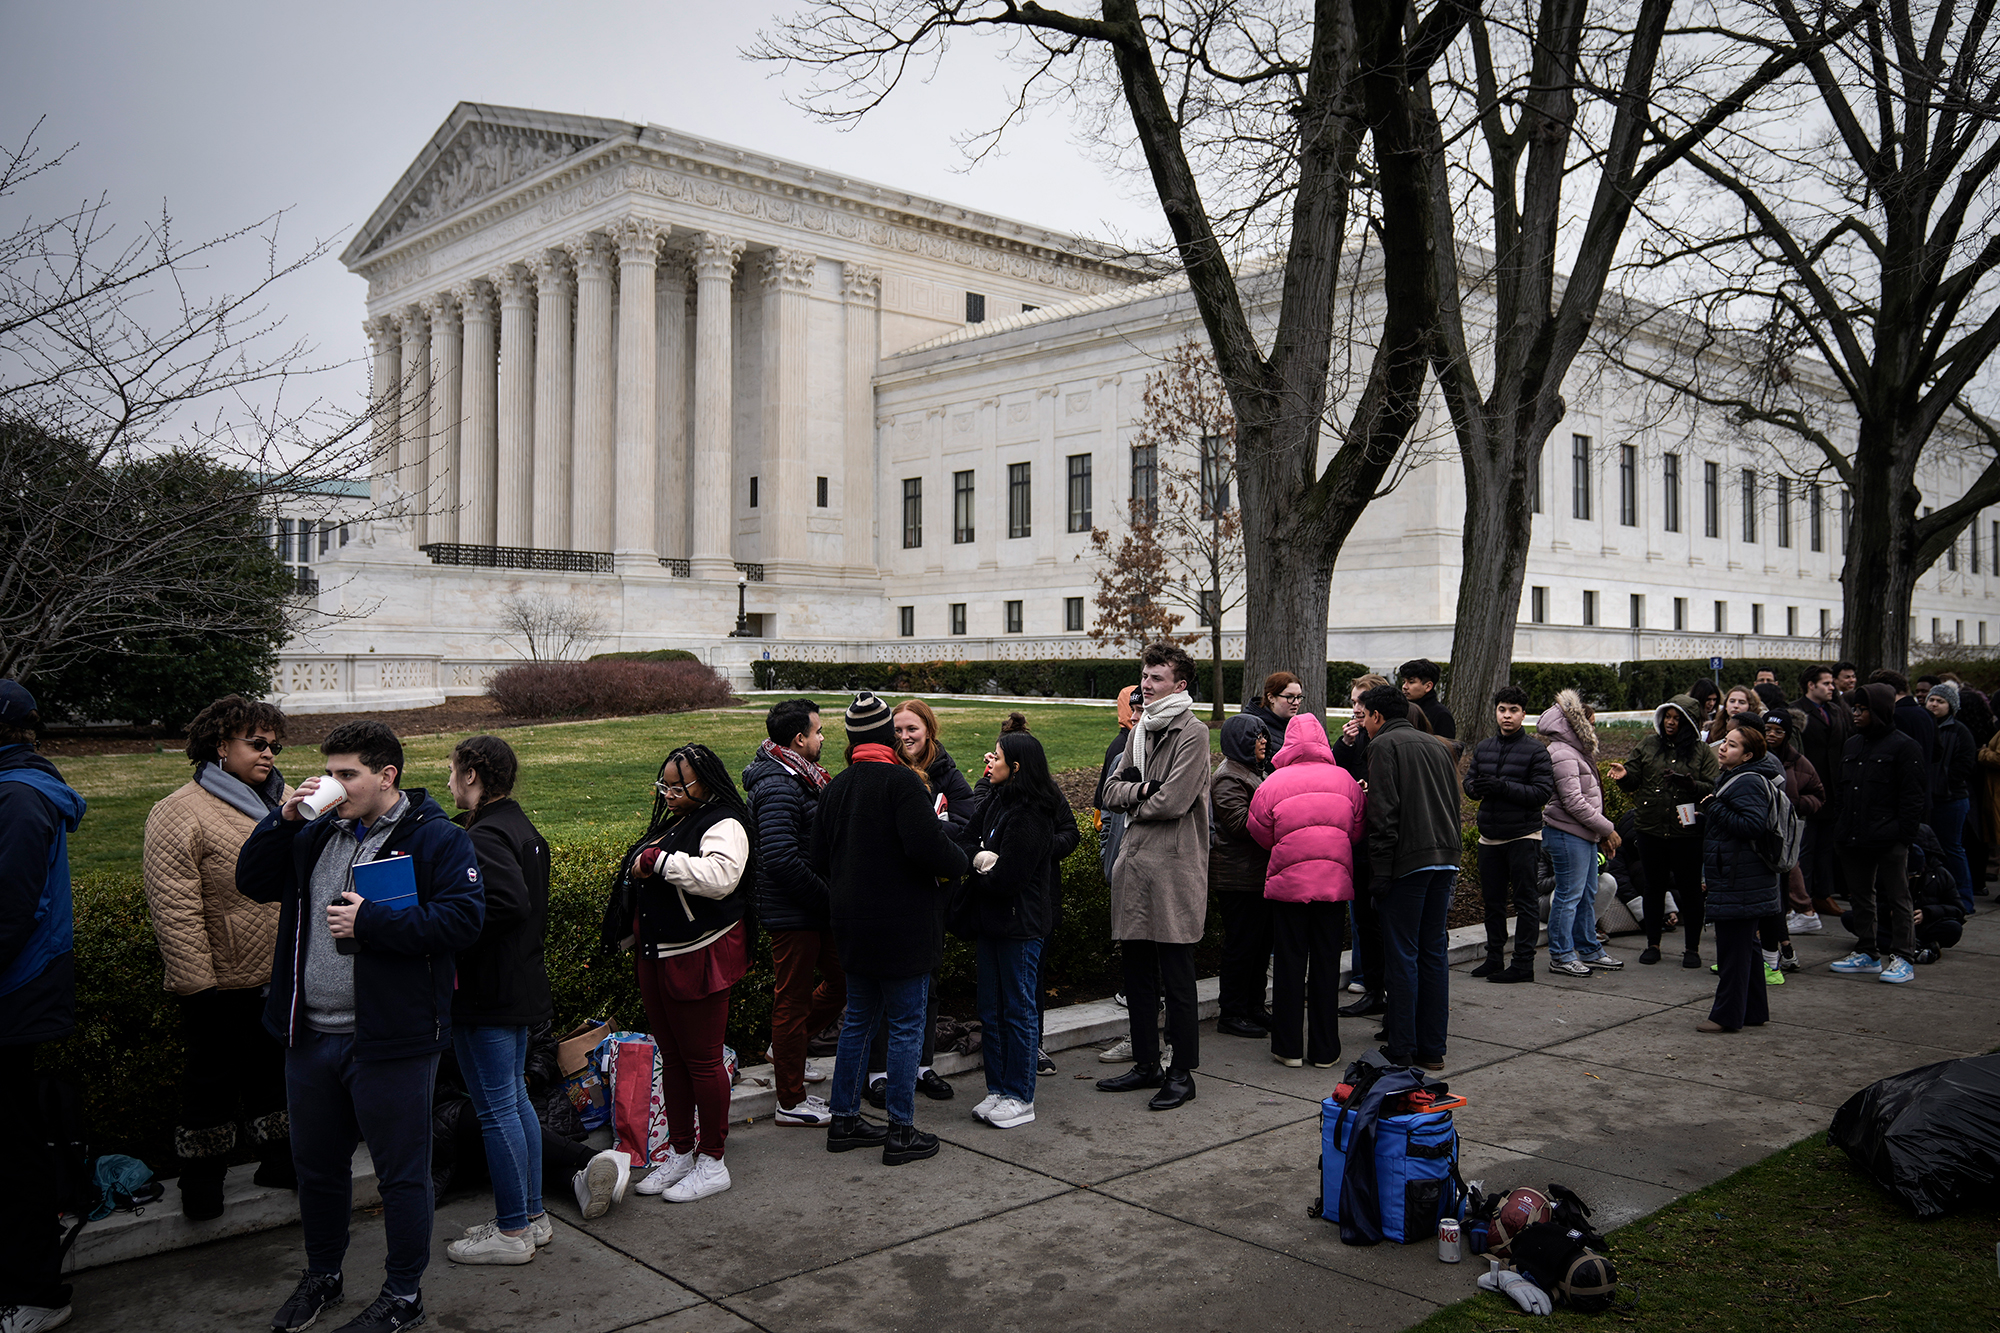 People wait in line to enter the U.S. Supreme Court to hear oral arguments on February 28 in Washington, DC.